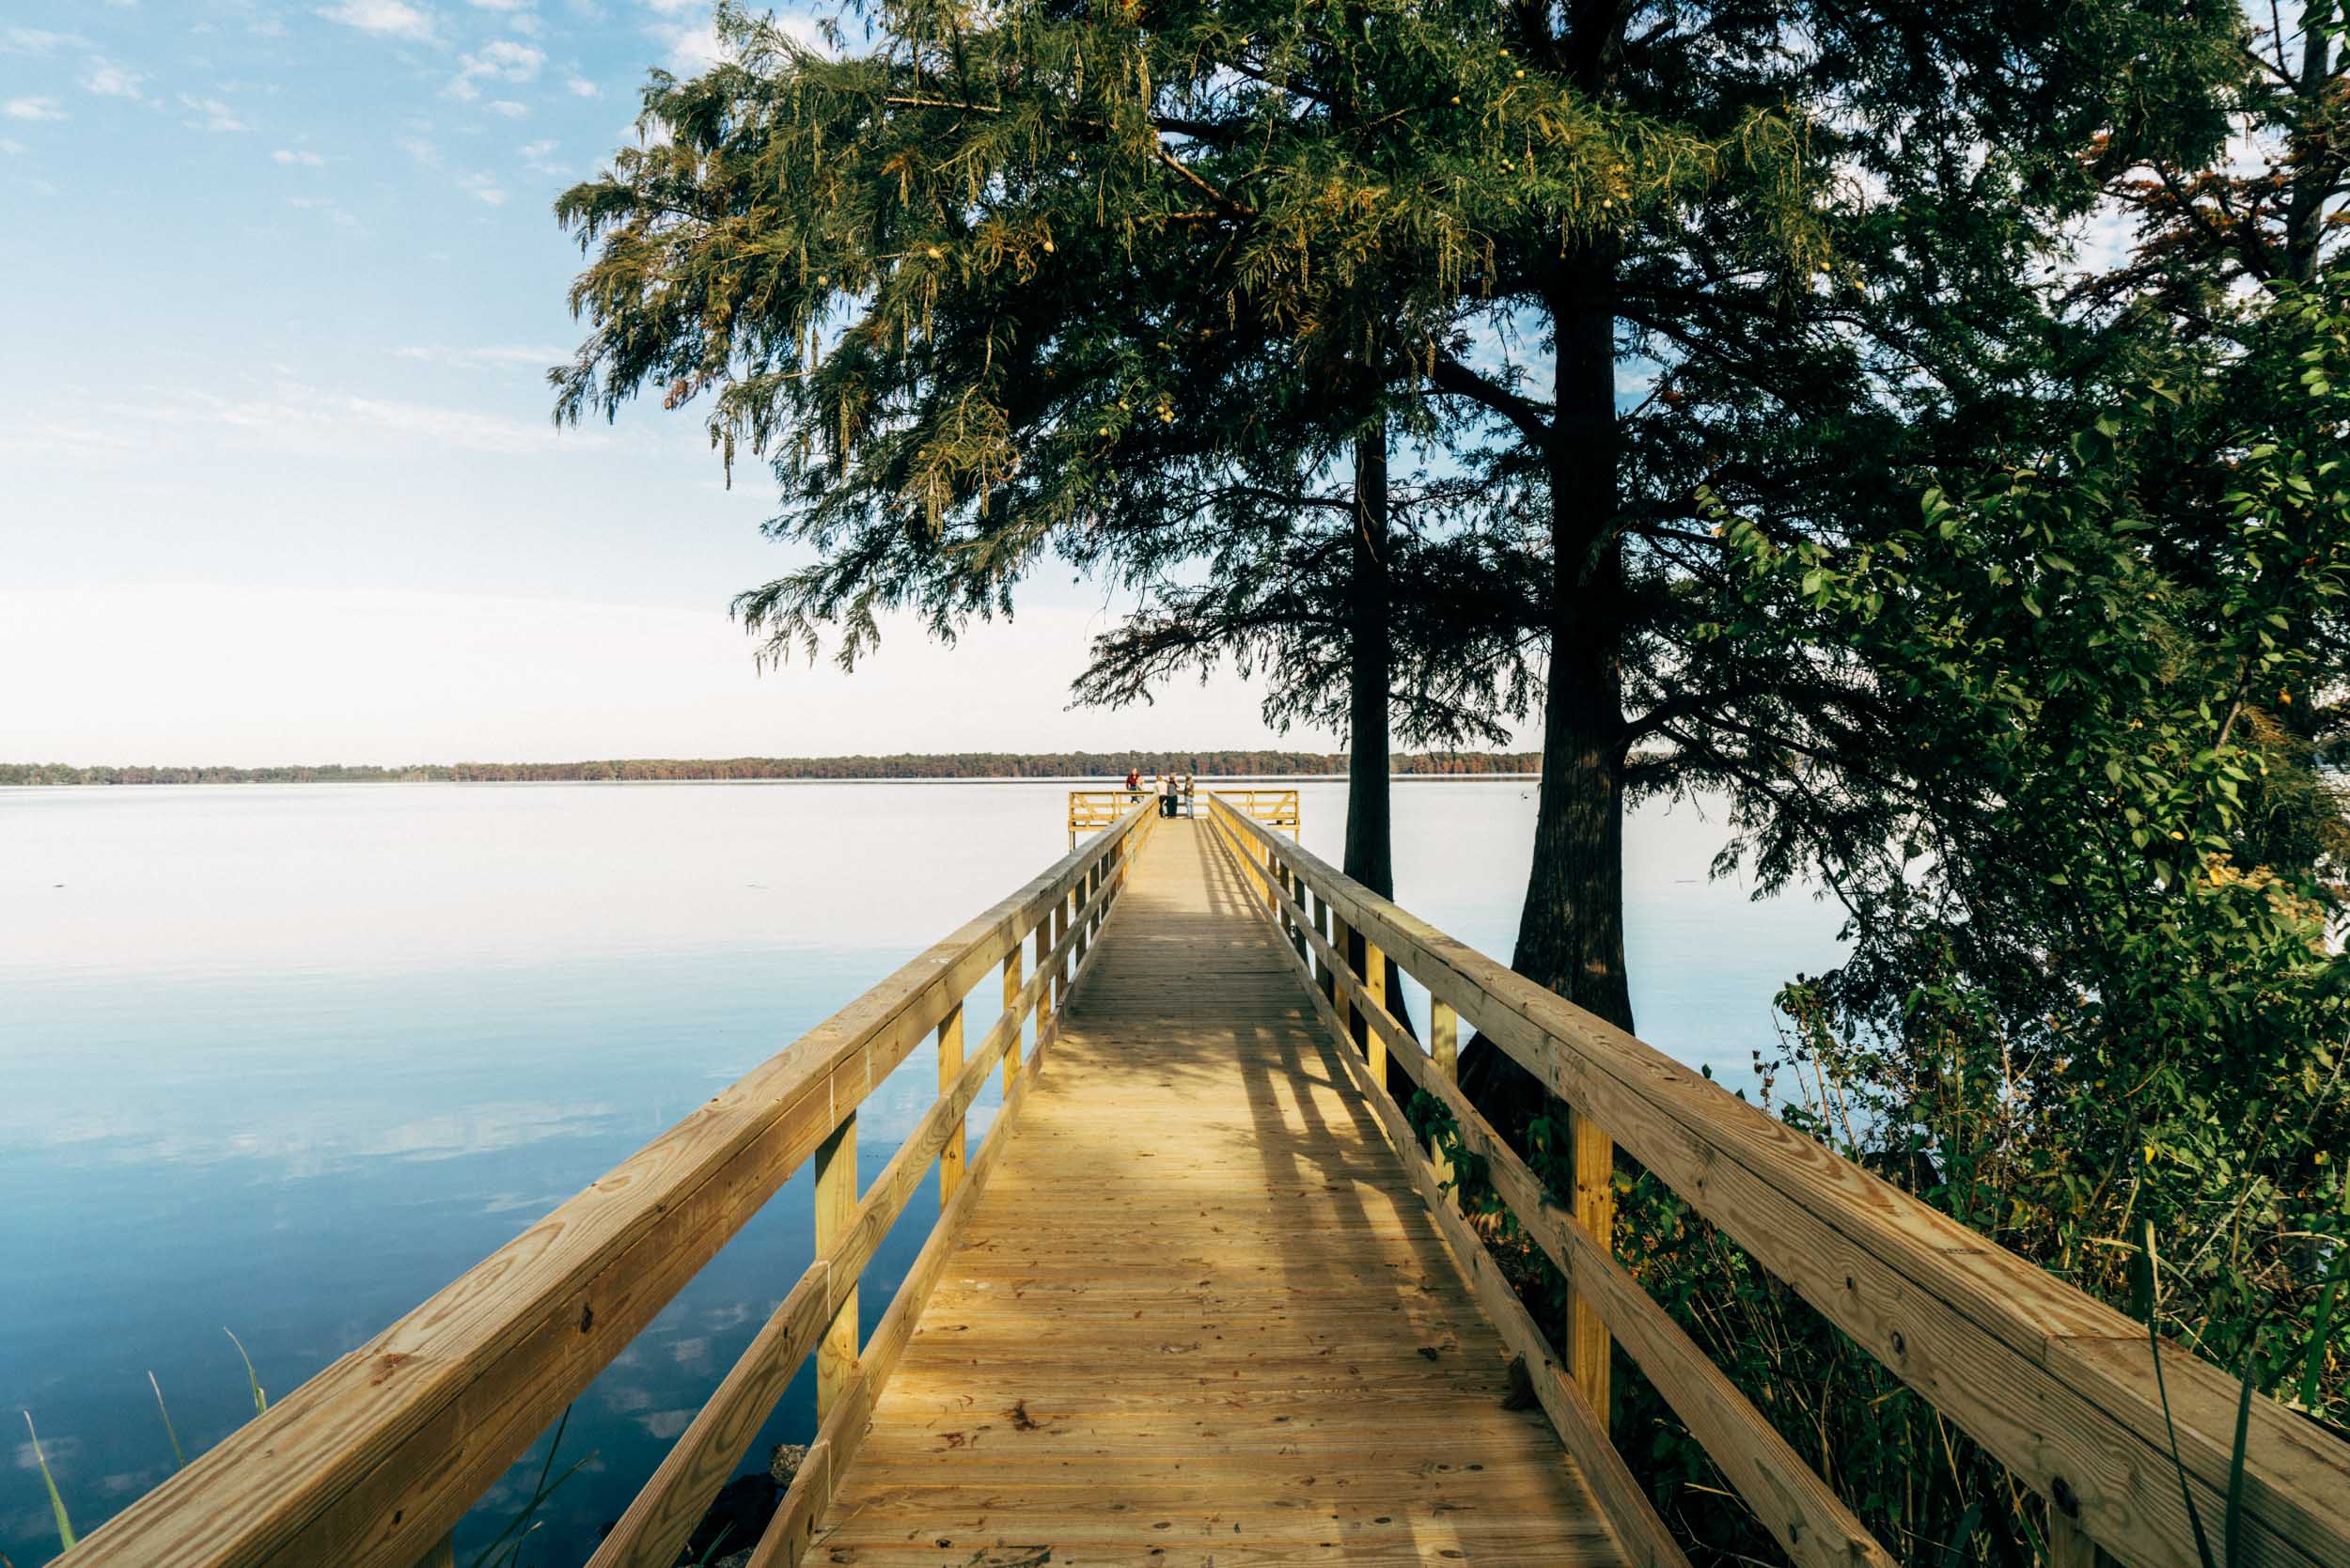 Reelfoot Lake State Park In Tiptonville, Tennessee.